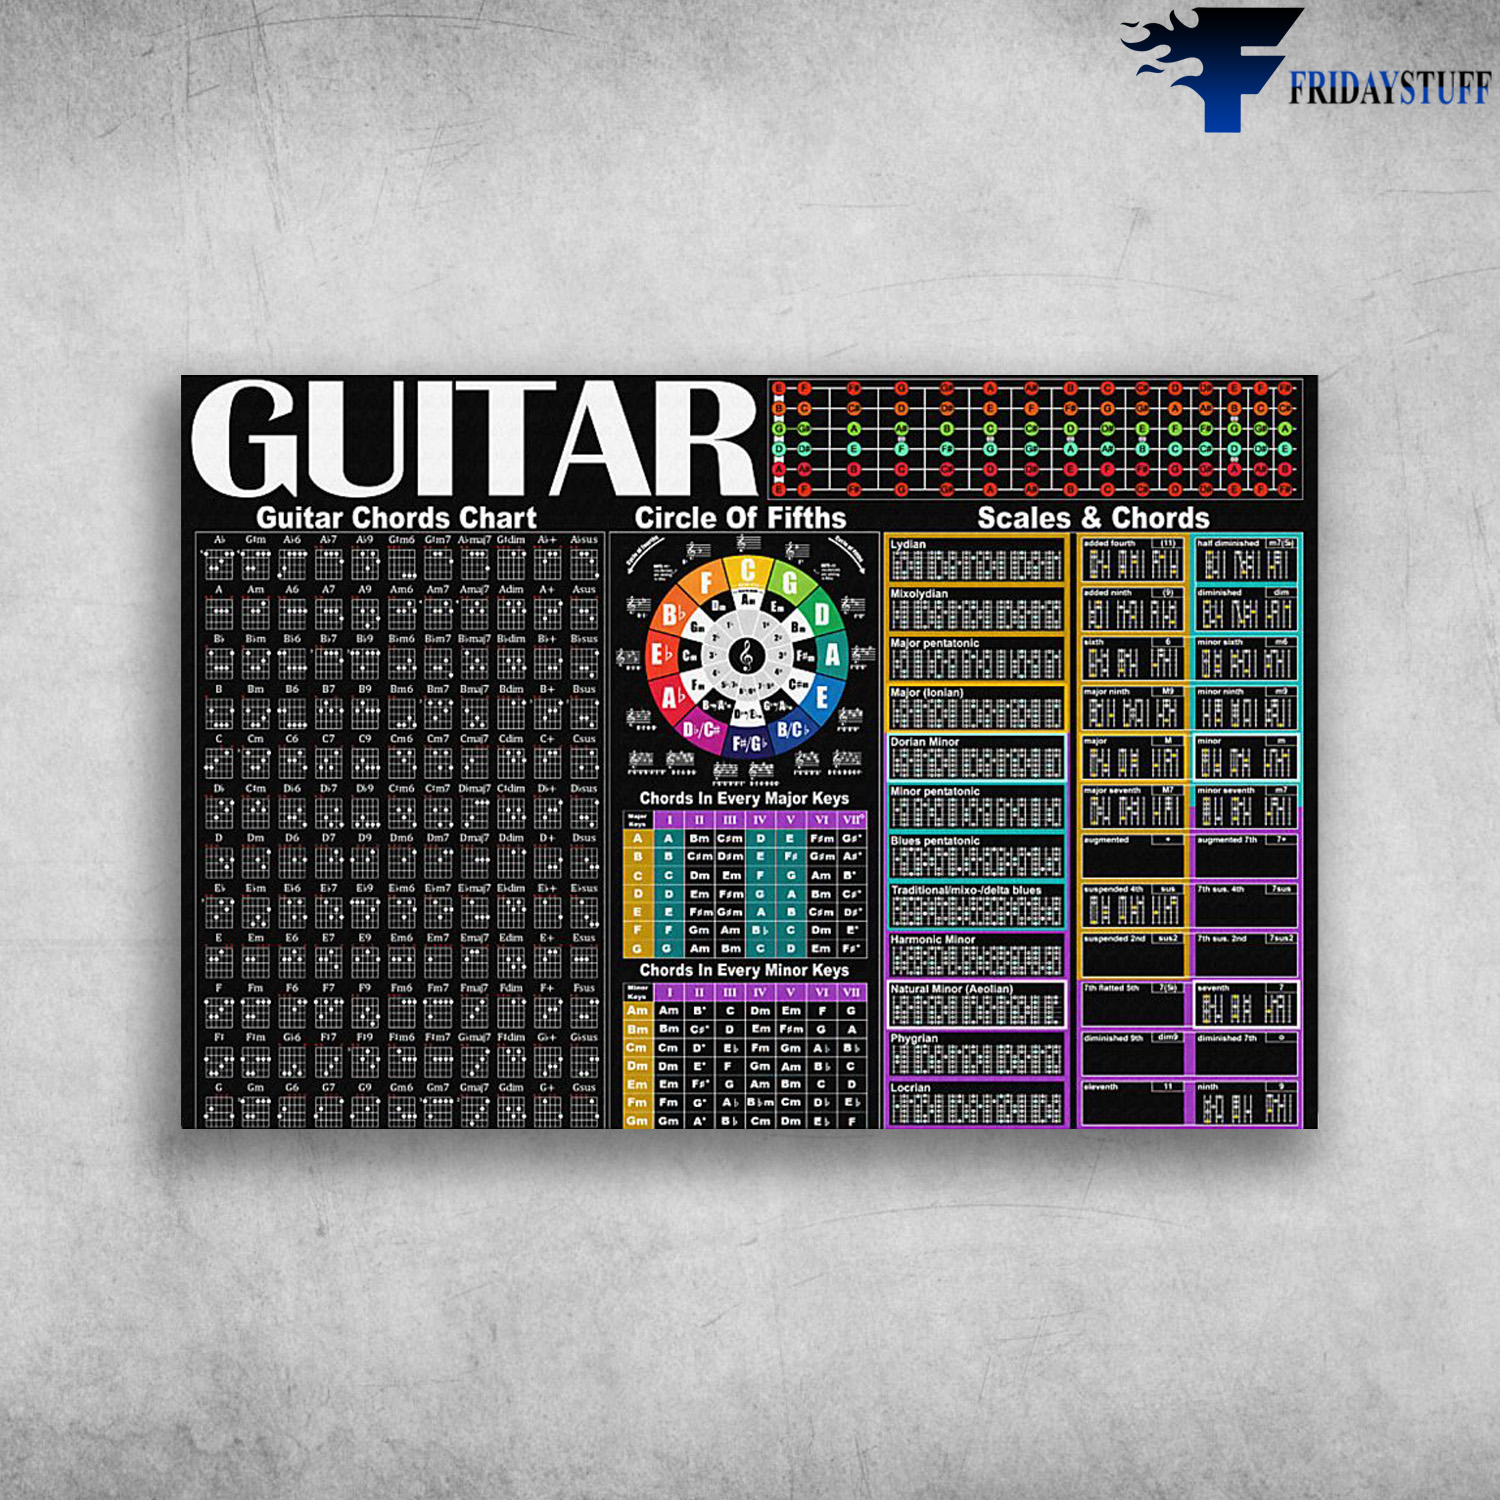 The Knowledge About Guitar - Guitar Chords Chart, Circle Of Fifths, Scale And Chords, Chords In Every Major Keys, Chords In Every Minor Keys